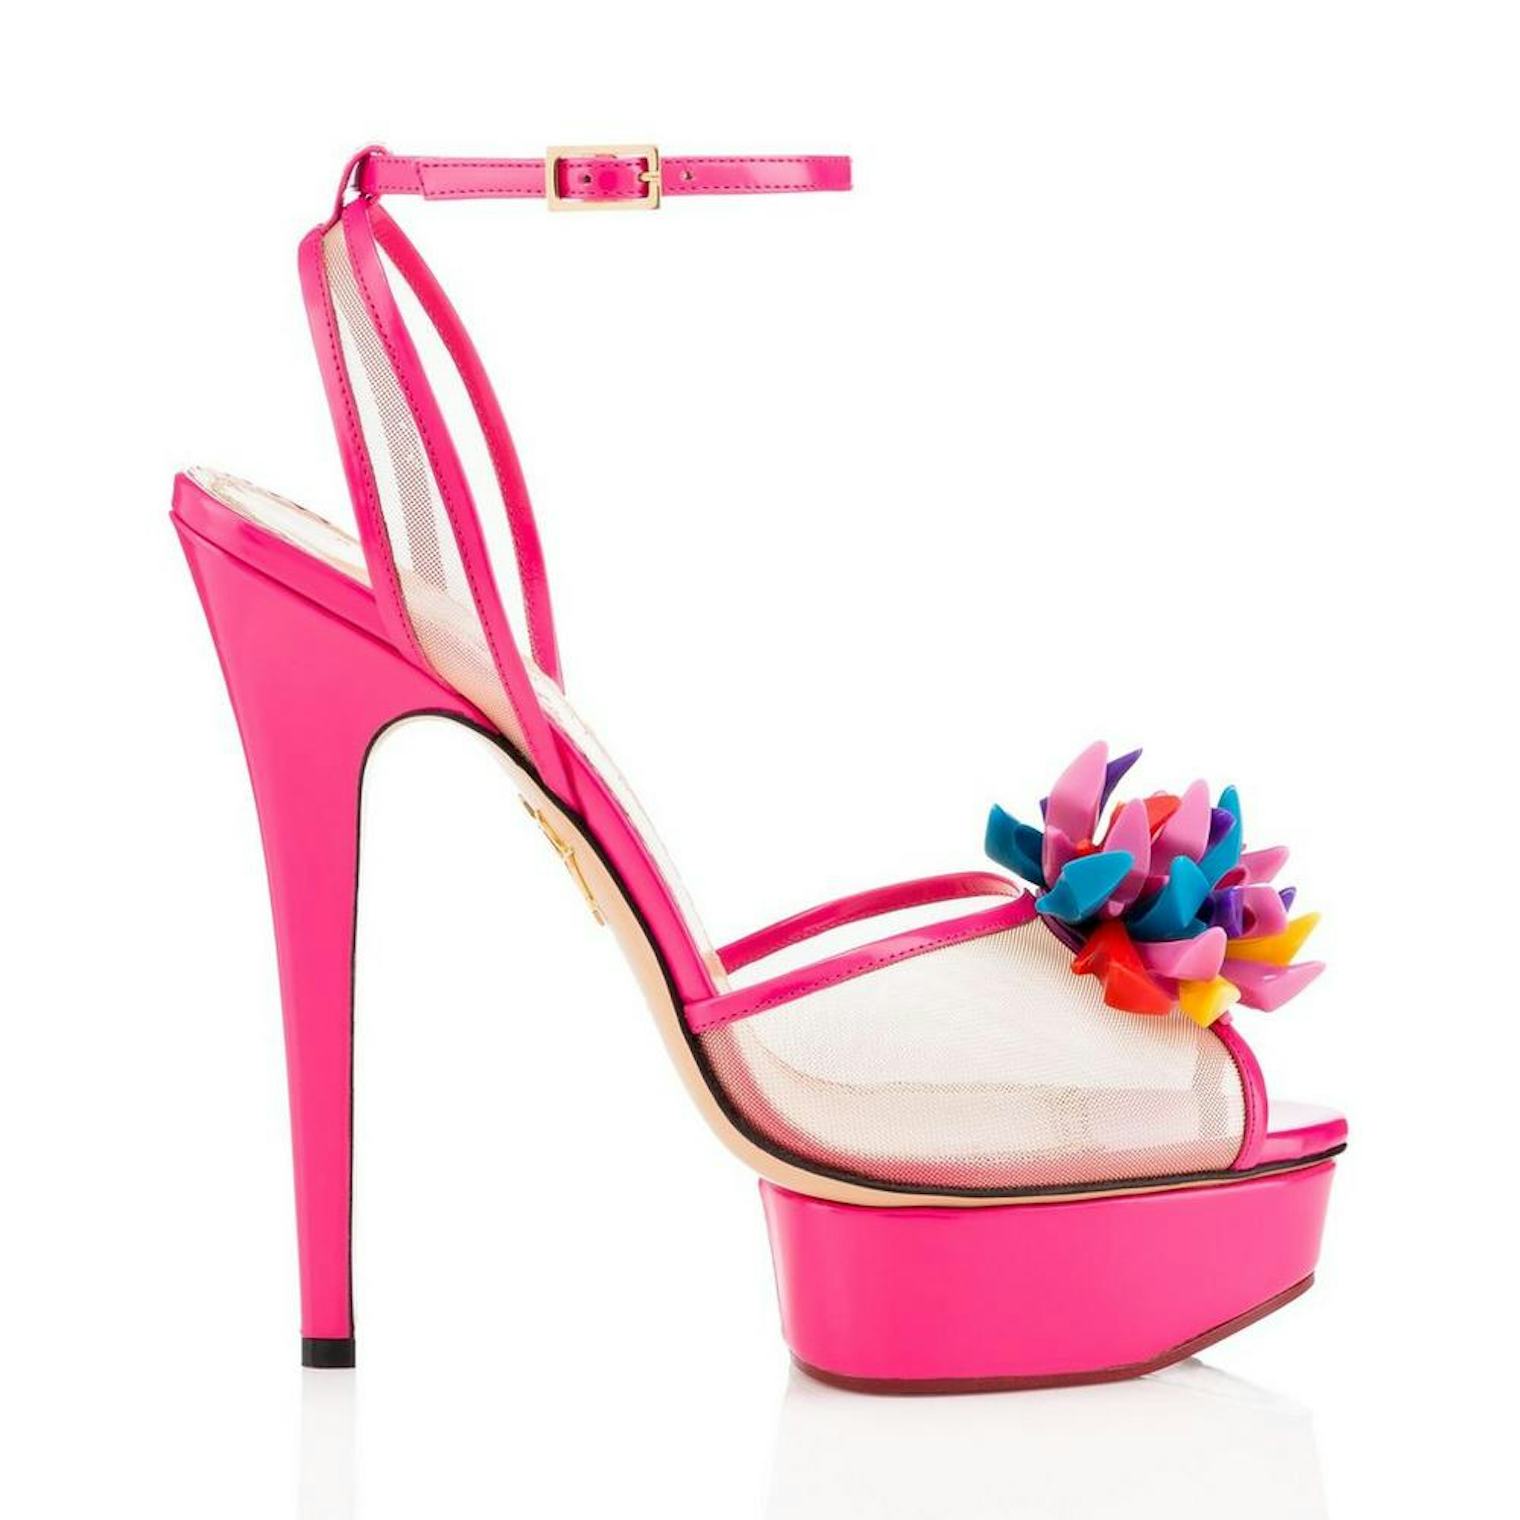 Charlotte Olympia And Barbie Collaborated On A New Collection